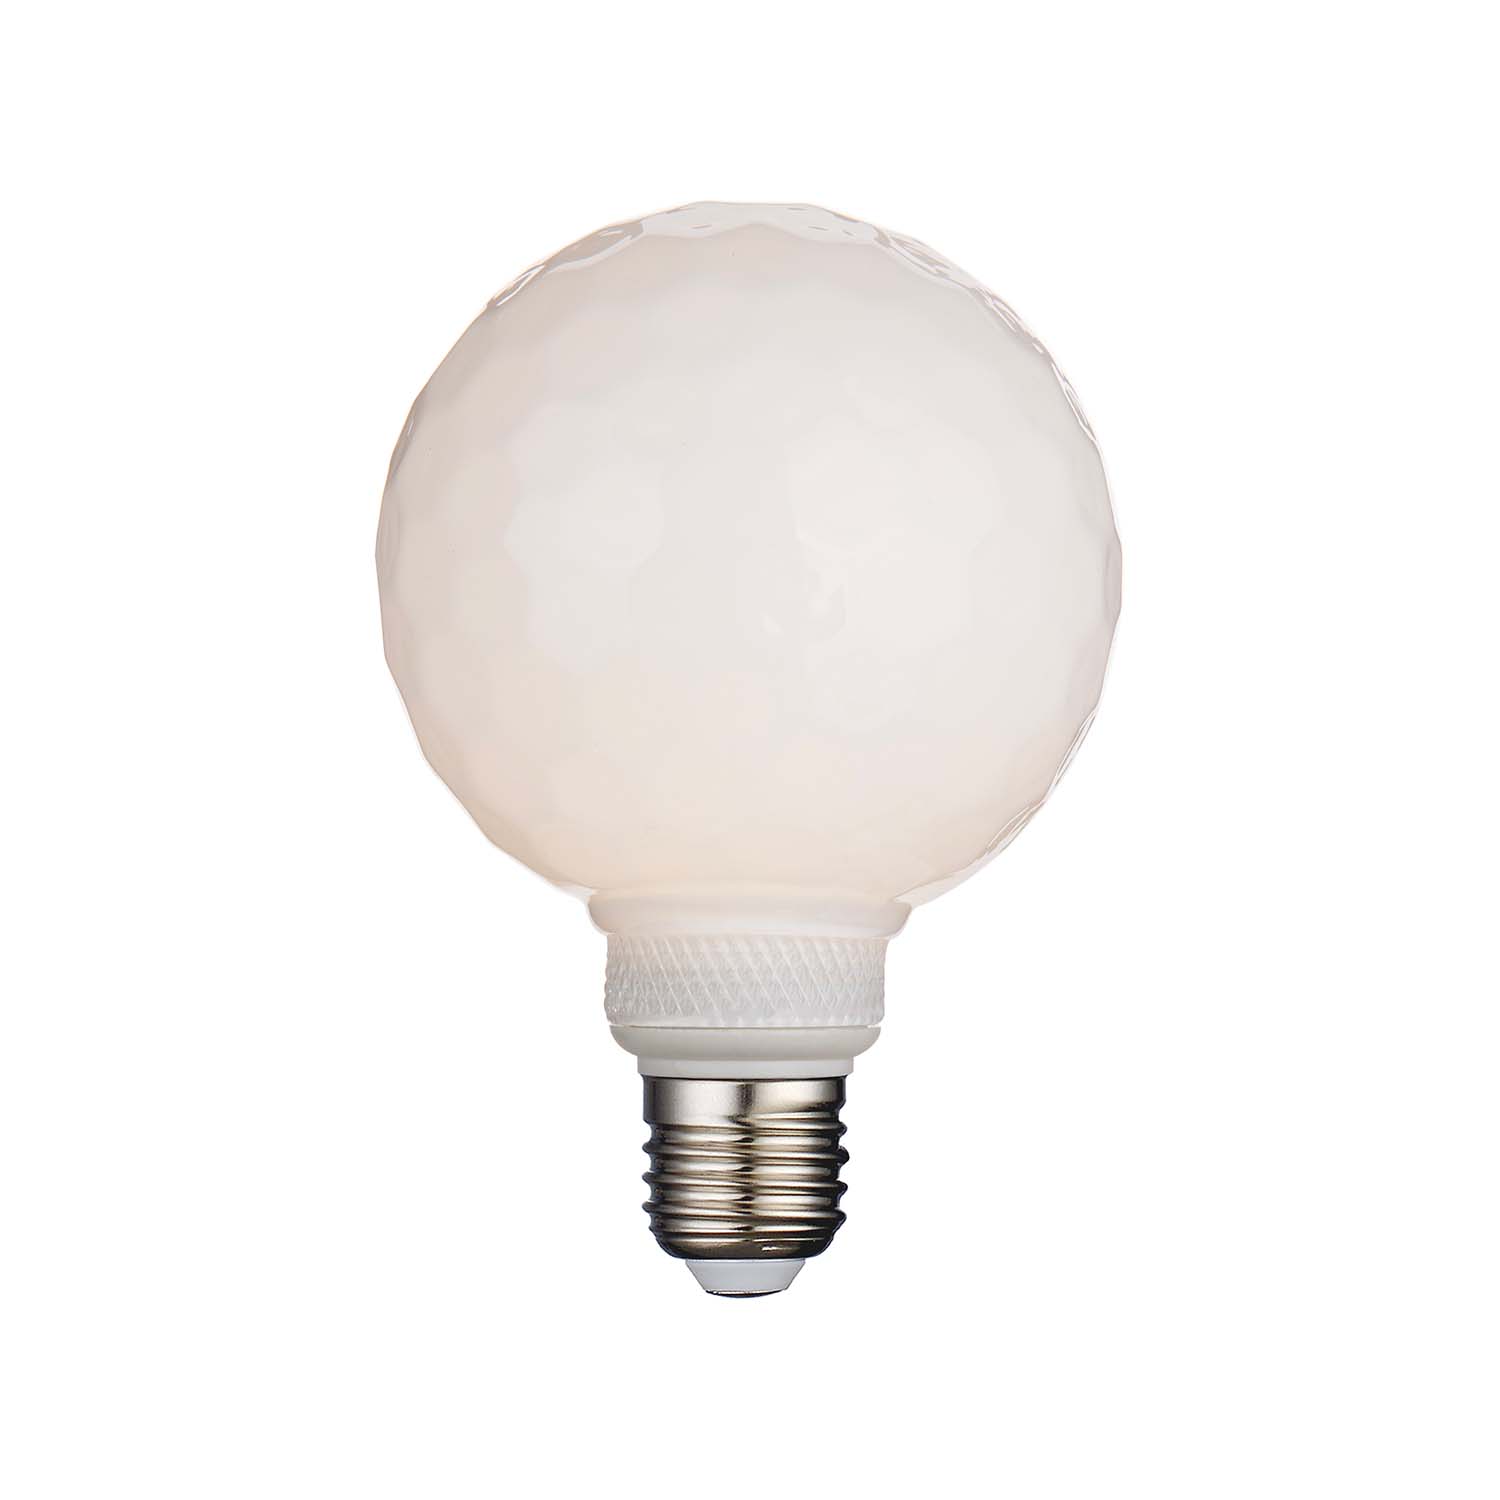 Geo - E27 LED bulb with hammered effect